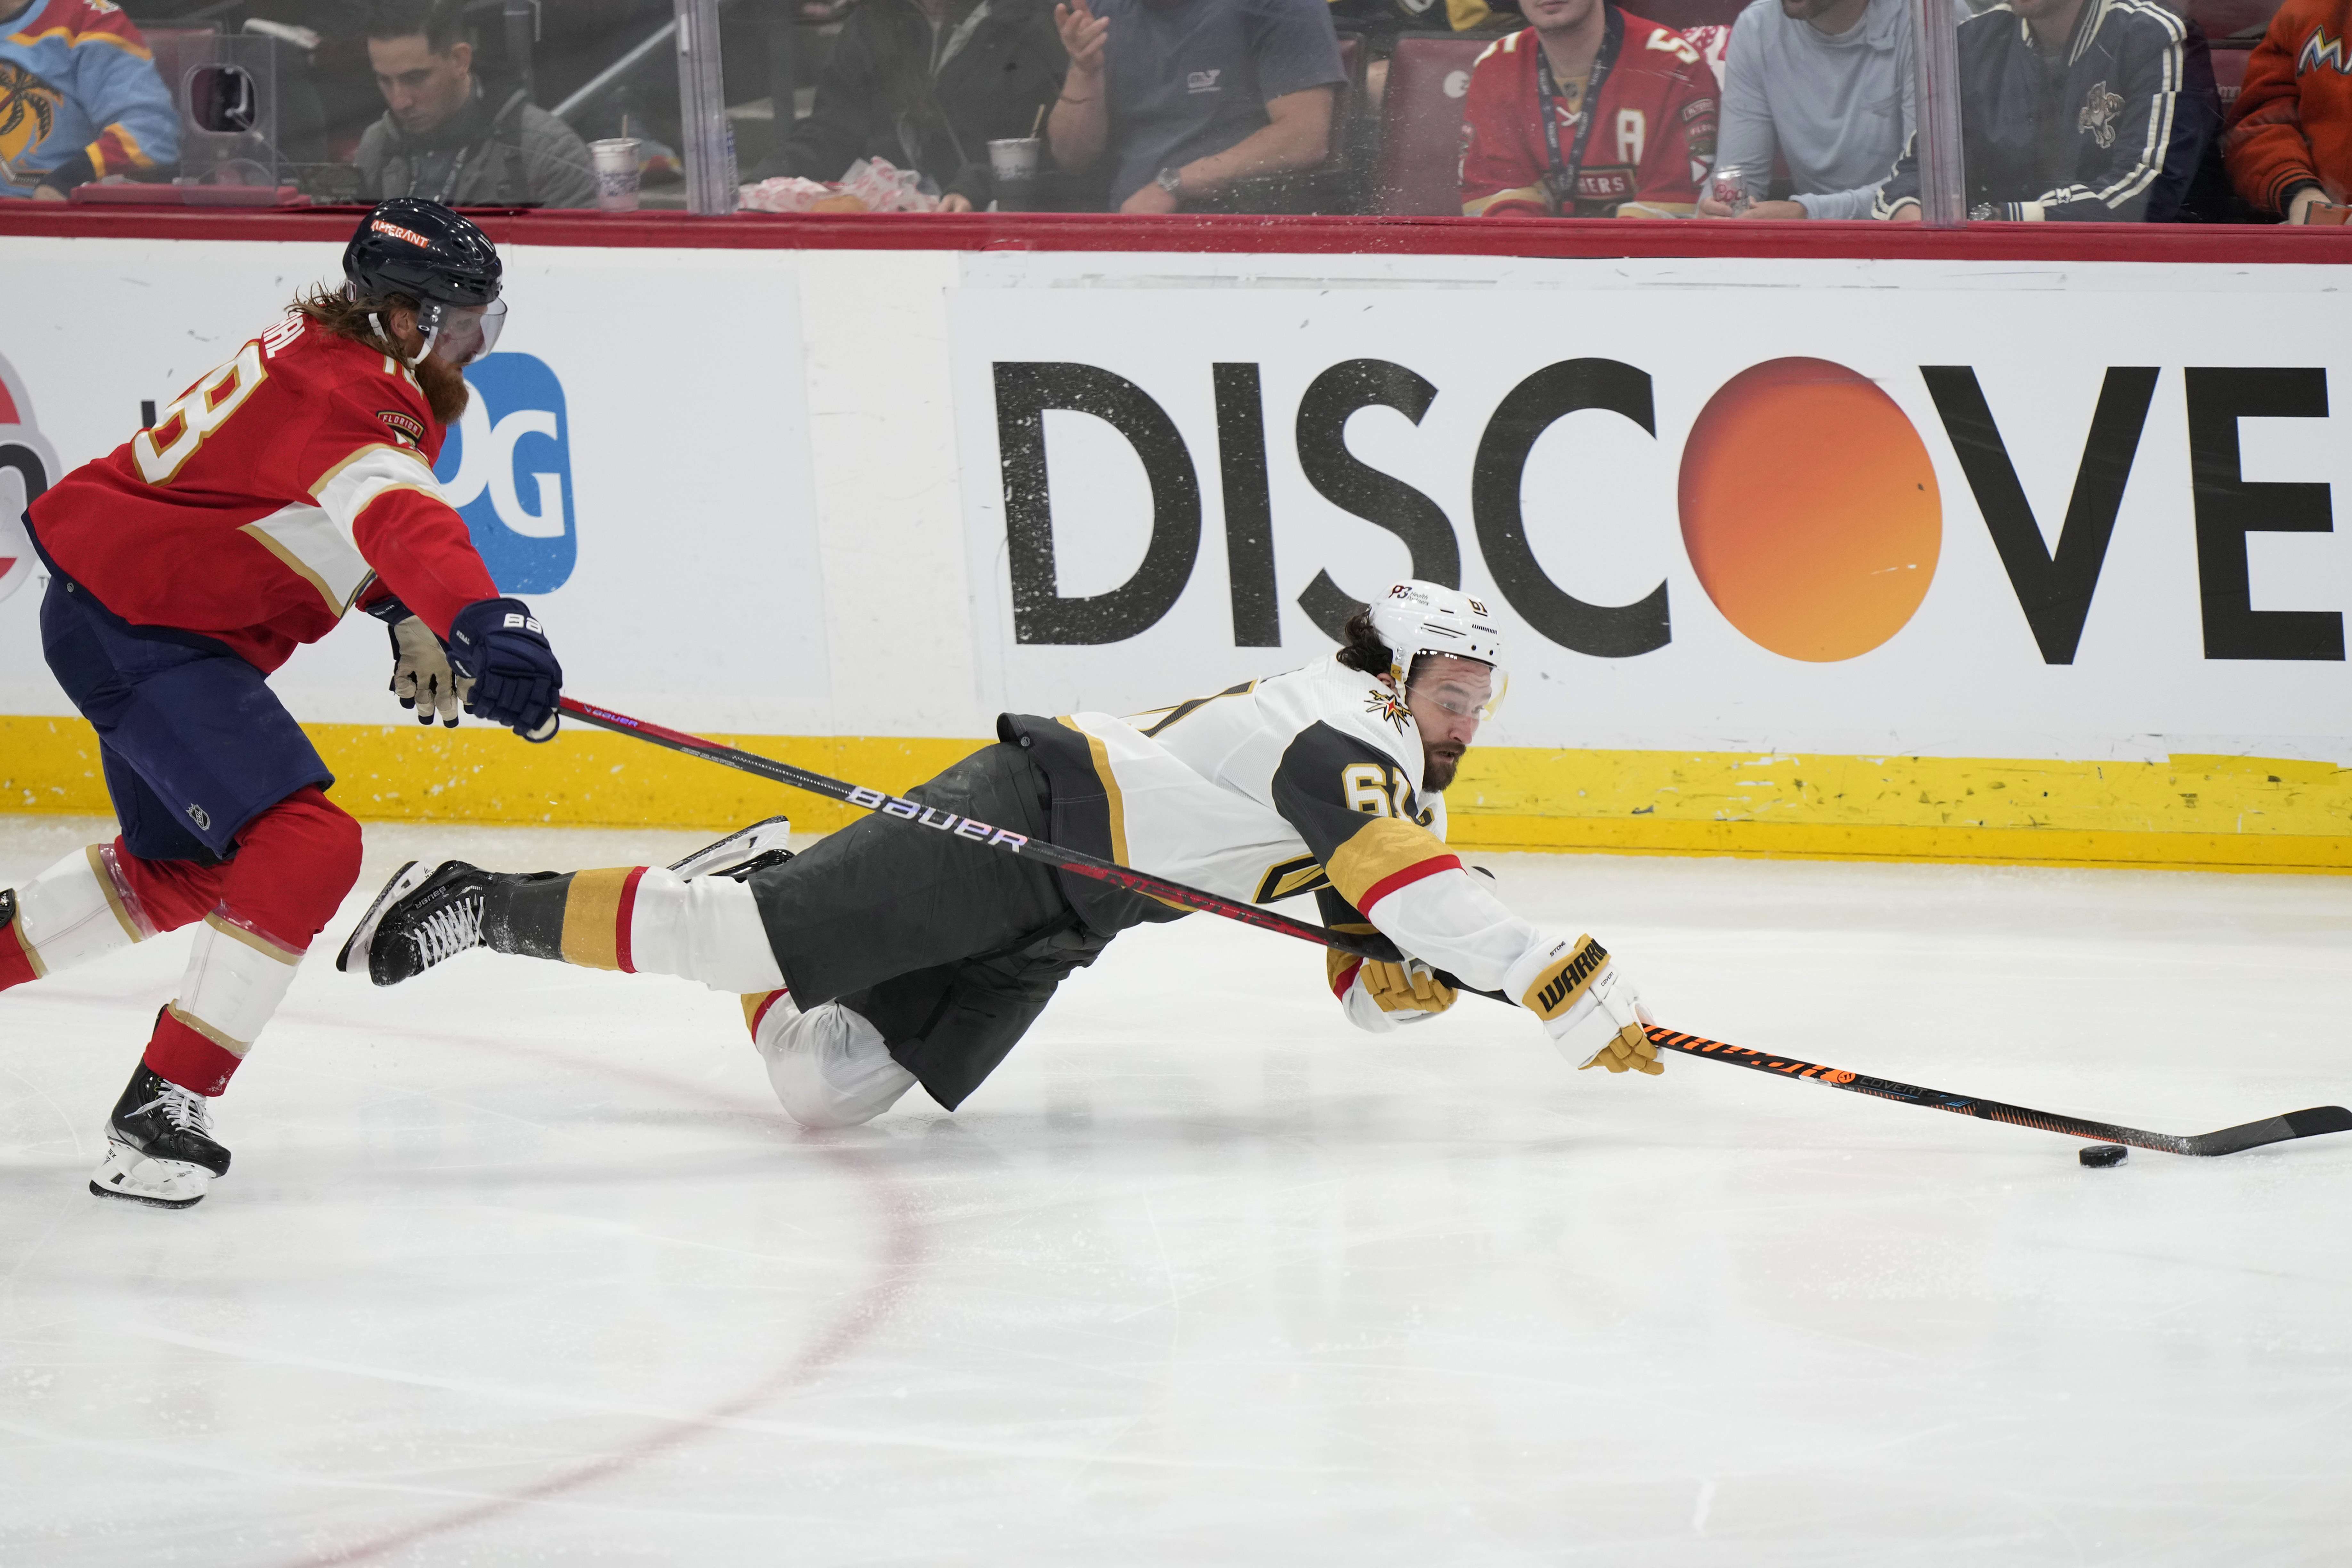 Stanley Cup Finals Bound: Golden Knights Close Deal In Dallas, Prepare For  Upstart Florida Panthers For SCF Game 1 In Las Vegas Saturday - LVSportsBiz